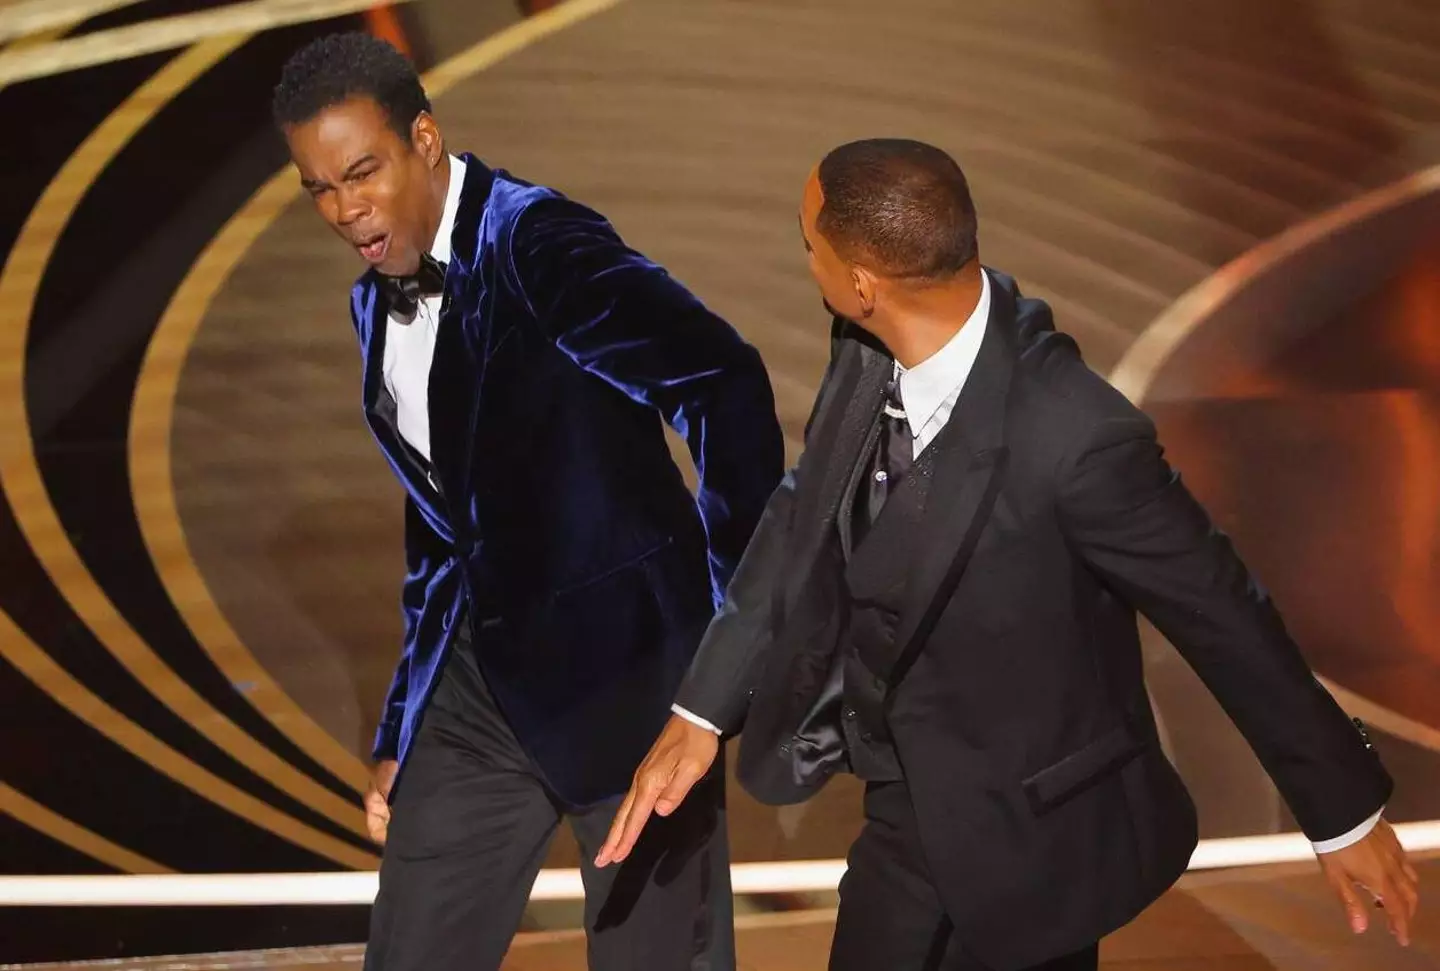 Will Smith slapping Chris Rock has become one of the most talked about moments in Oscars history.